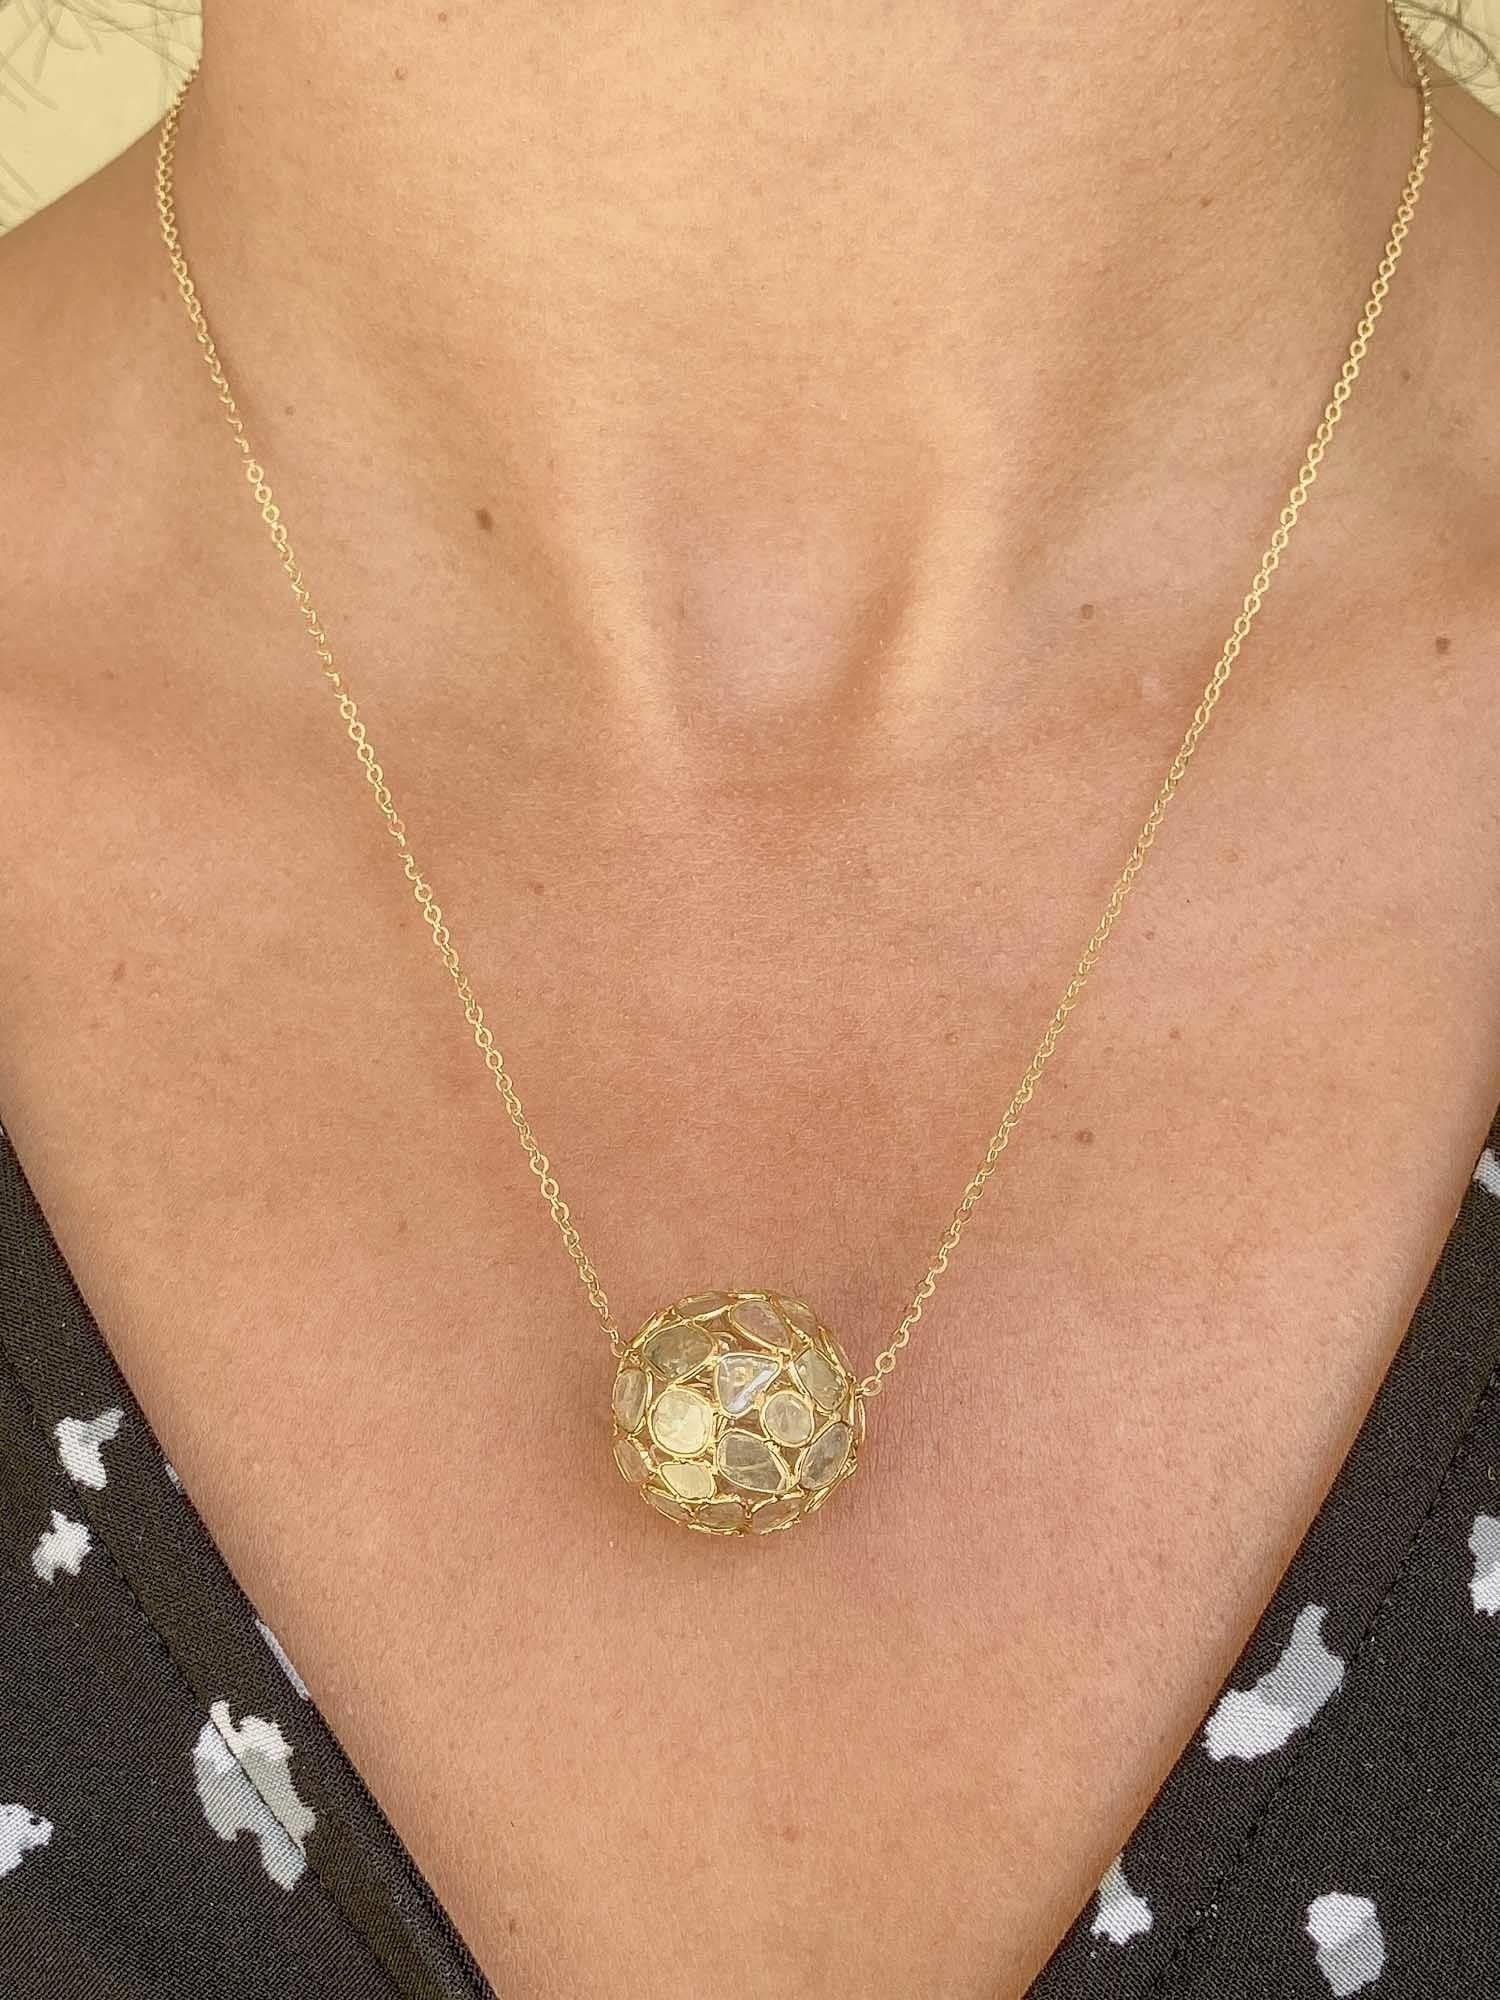 Diamond Slice Ball Pendant 18K Yellow Gold Sliding Charm AD1908 In New Condition For Sale In Osprey, FL